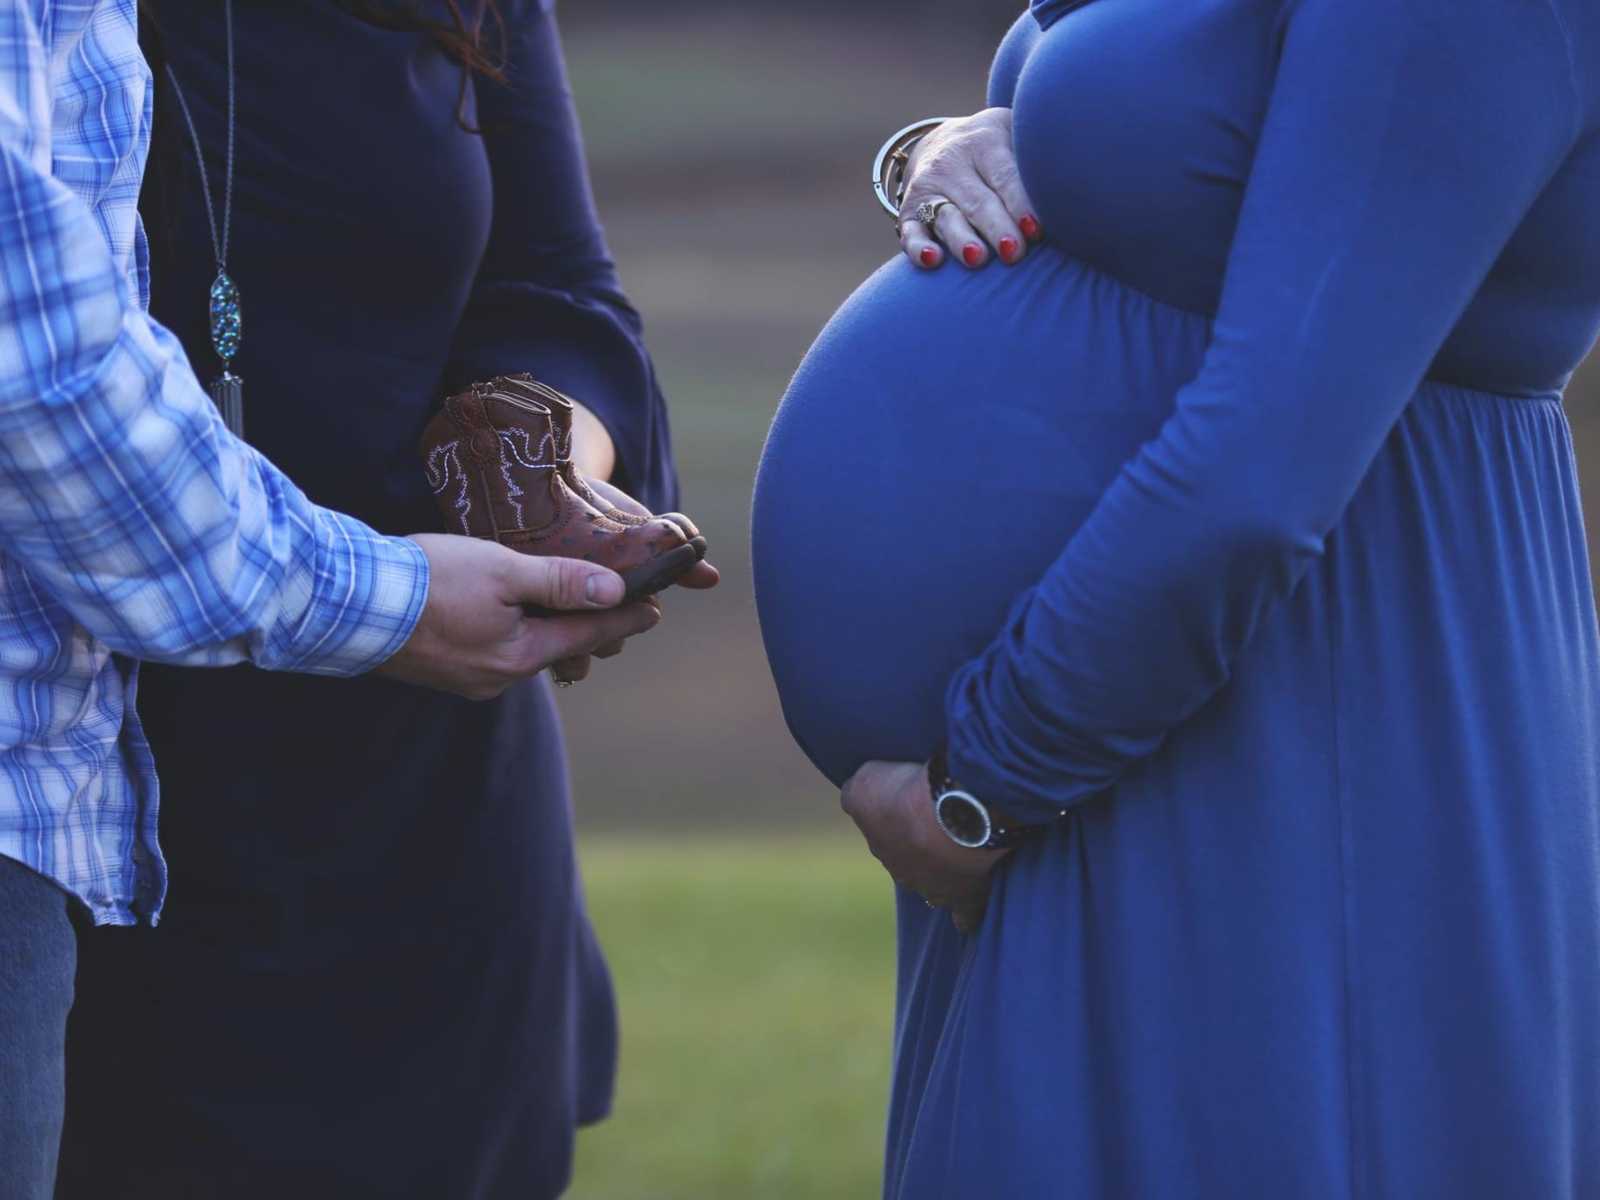 pregnant woman holds her stomach while man and woman hold baby cowboy boots in their hands